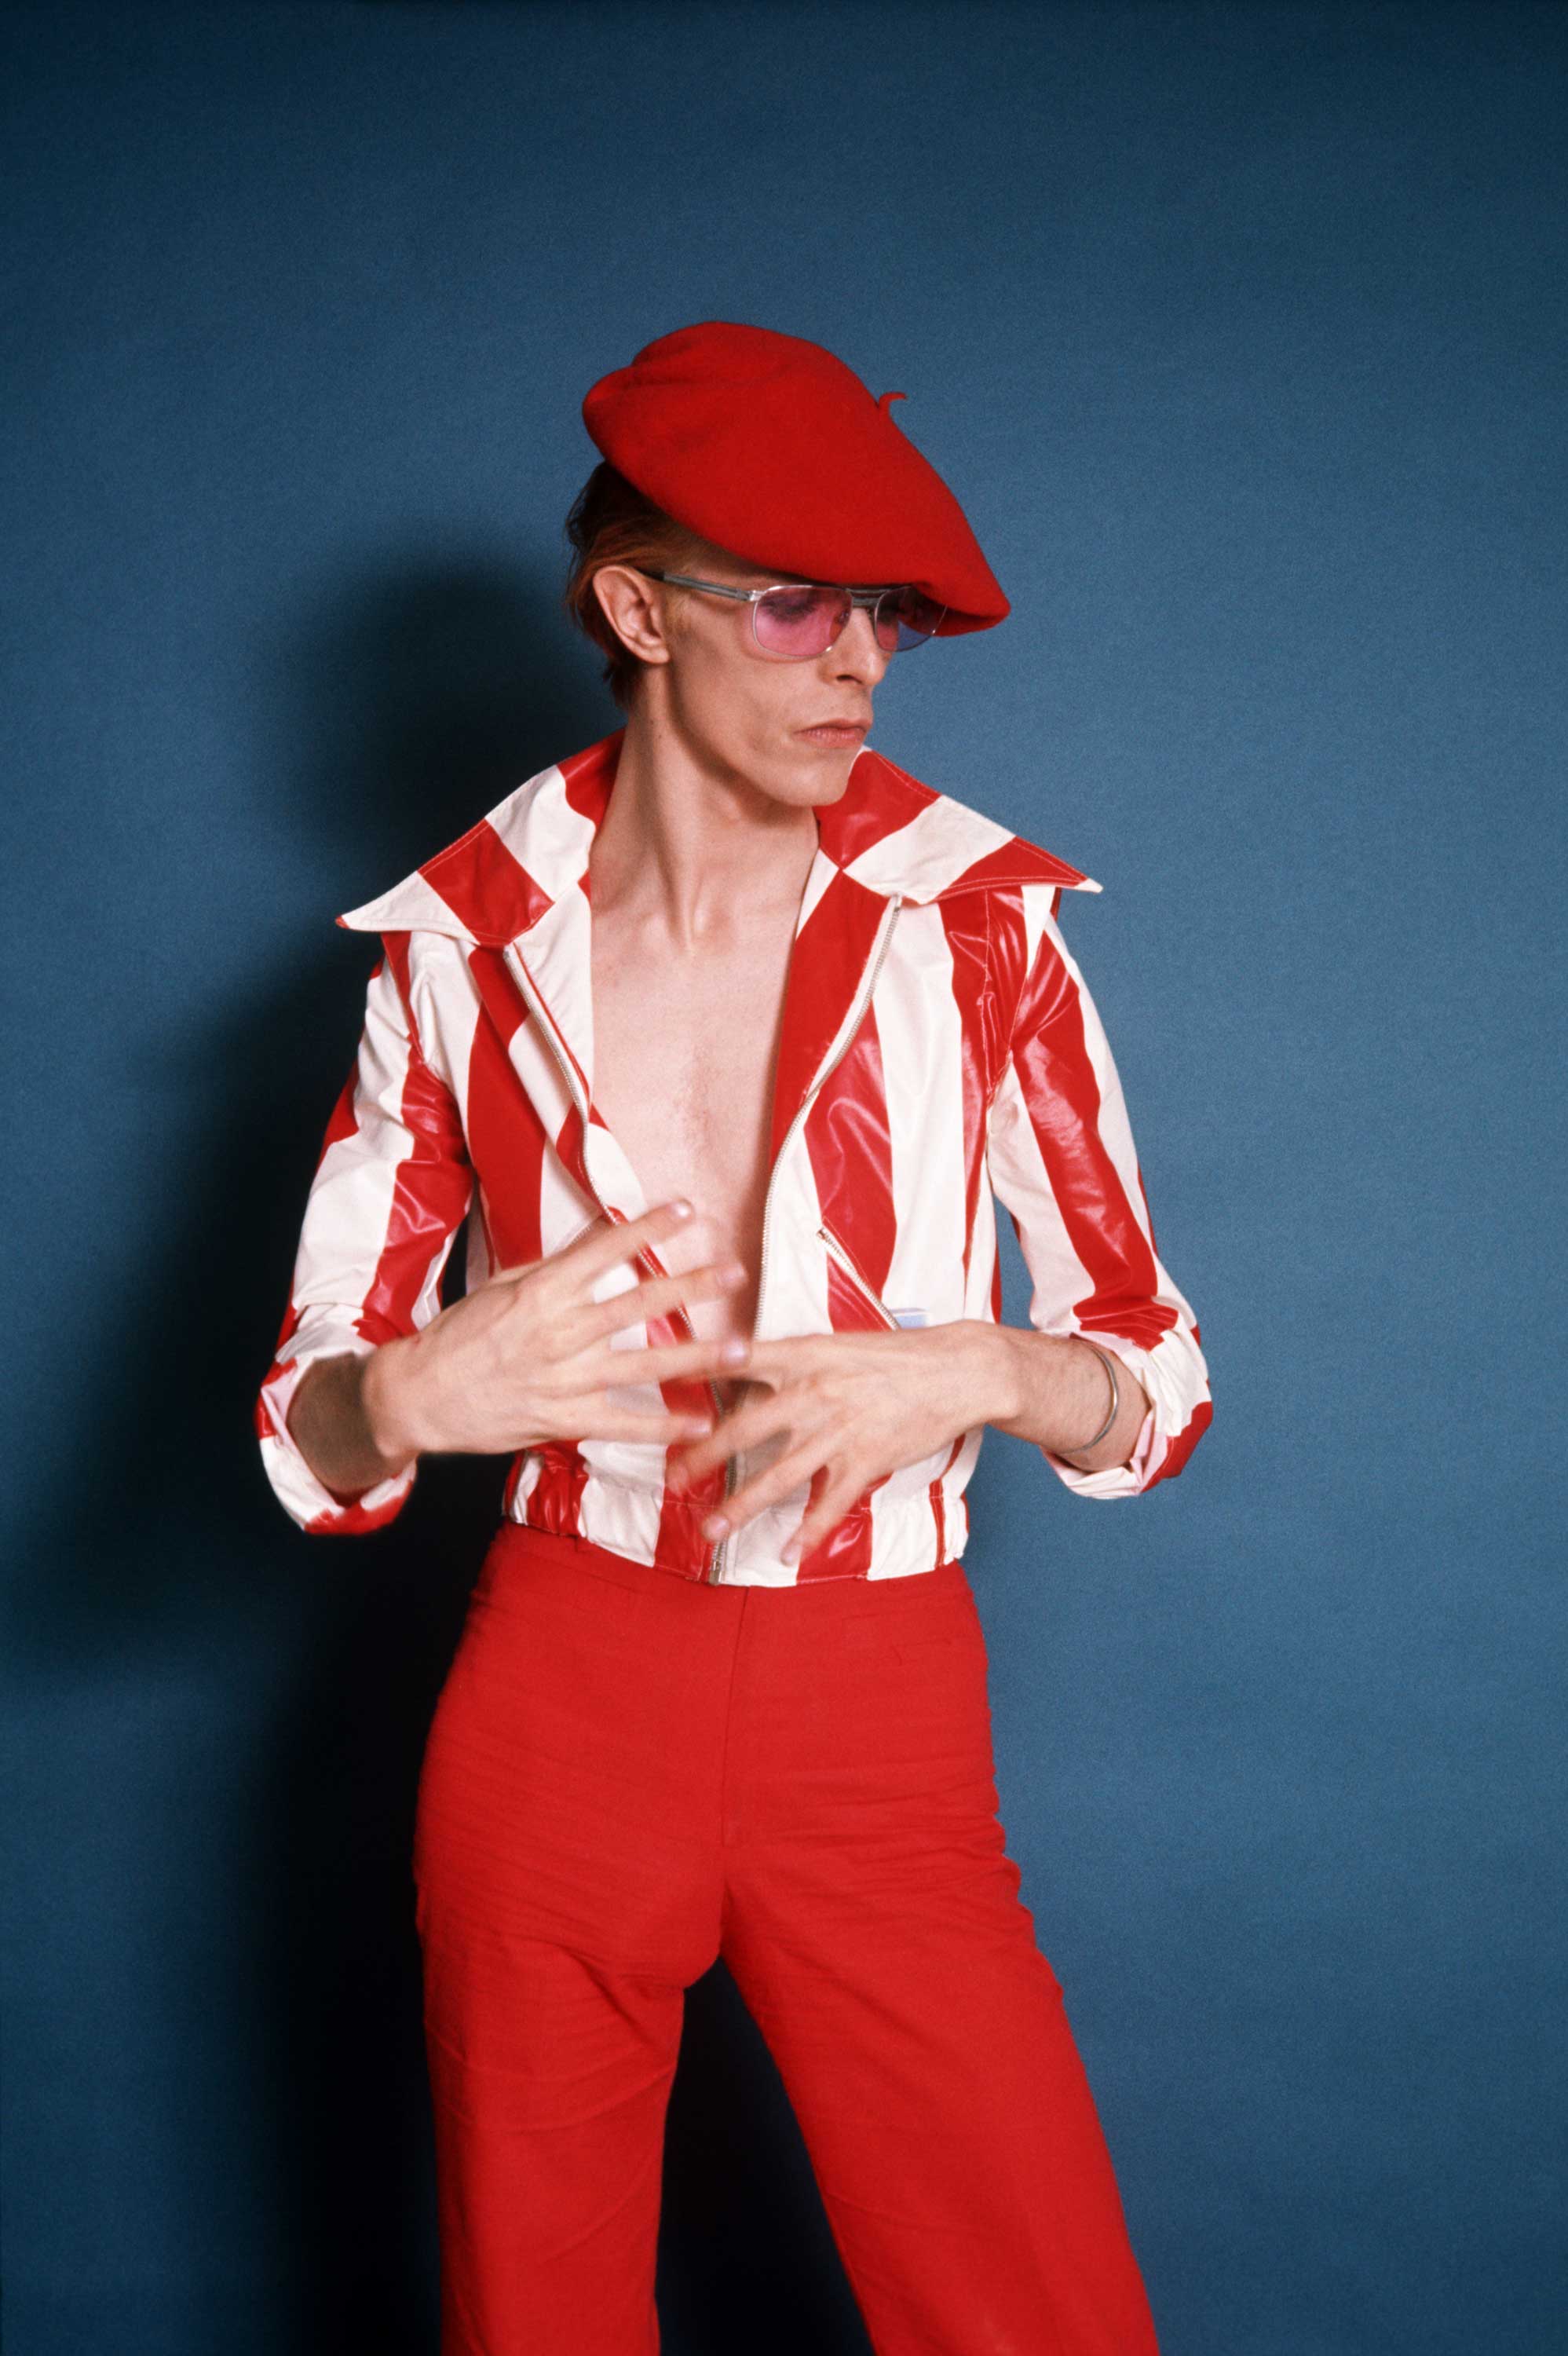 Steve Schapiro: In this previously unpublished photo, David took me by surprise when he came out in the red and white striped outfit during  the 1974 photo shoot. It was different from what we expected  he would be wearing. Los Angeles, 1974.